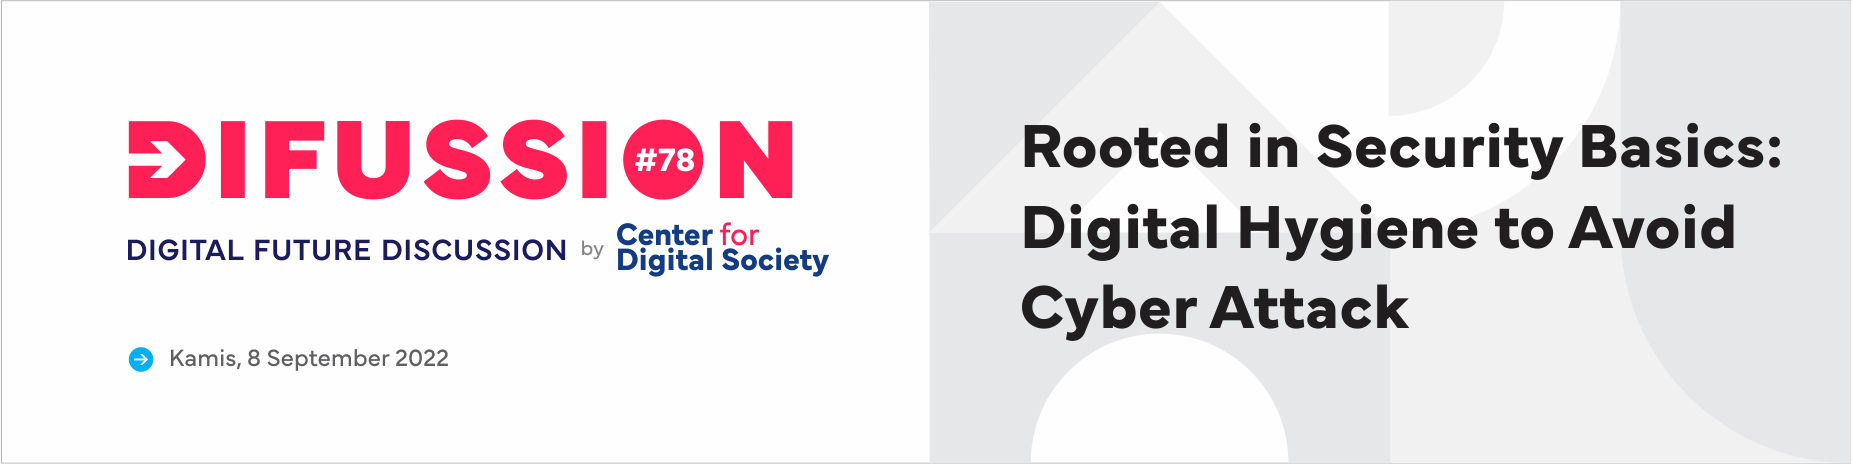 [SIARAN PERS] Rooted in Security Basics: Digital hygiene to Avoid Cyber Attack | #Difussion78